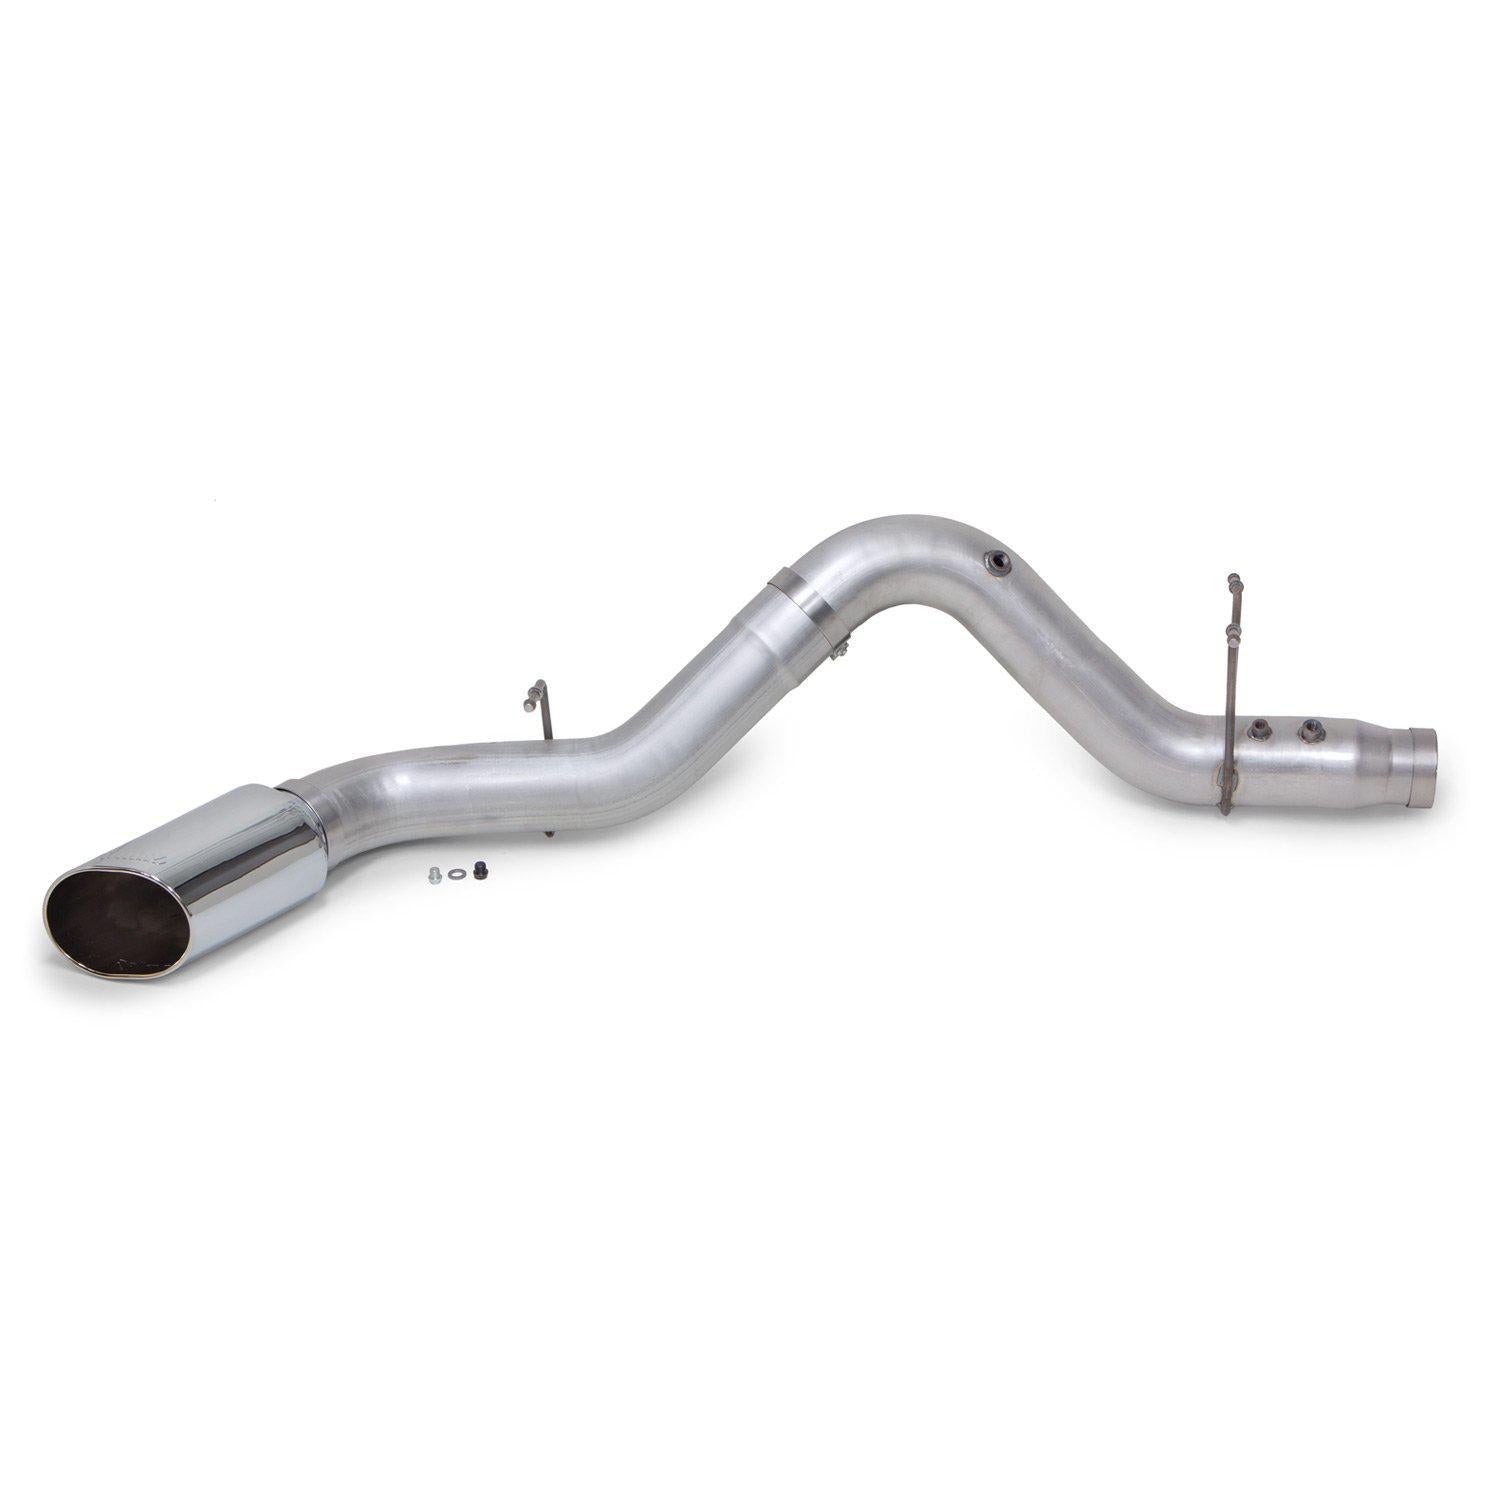 2017-2019 Duramax 5" Filter Back Exhaust System (48996)-Filter Back Exhaust System-Banks Power-48996-Dirty Diesel Customs